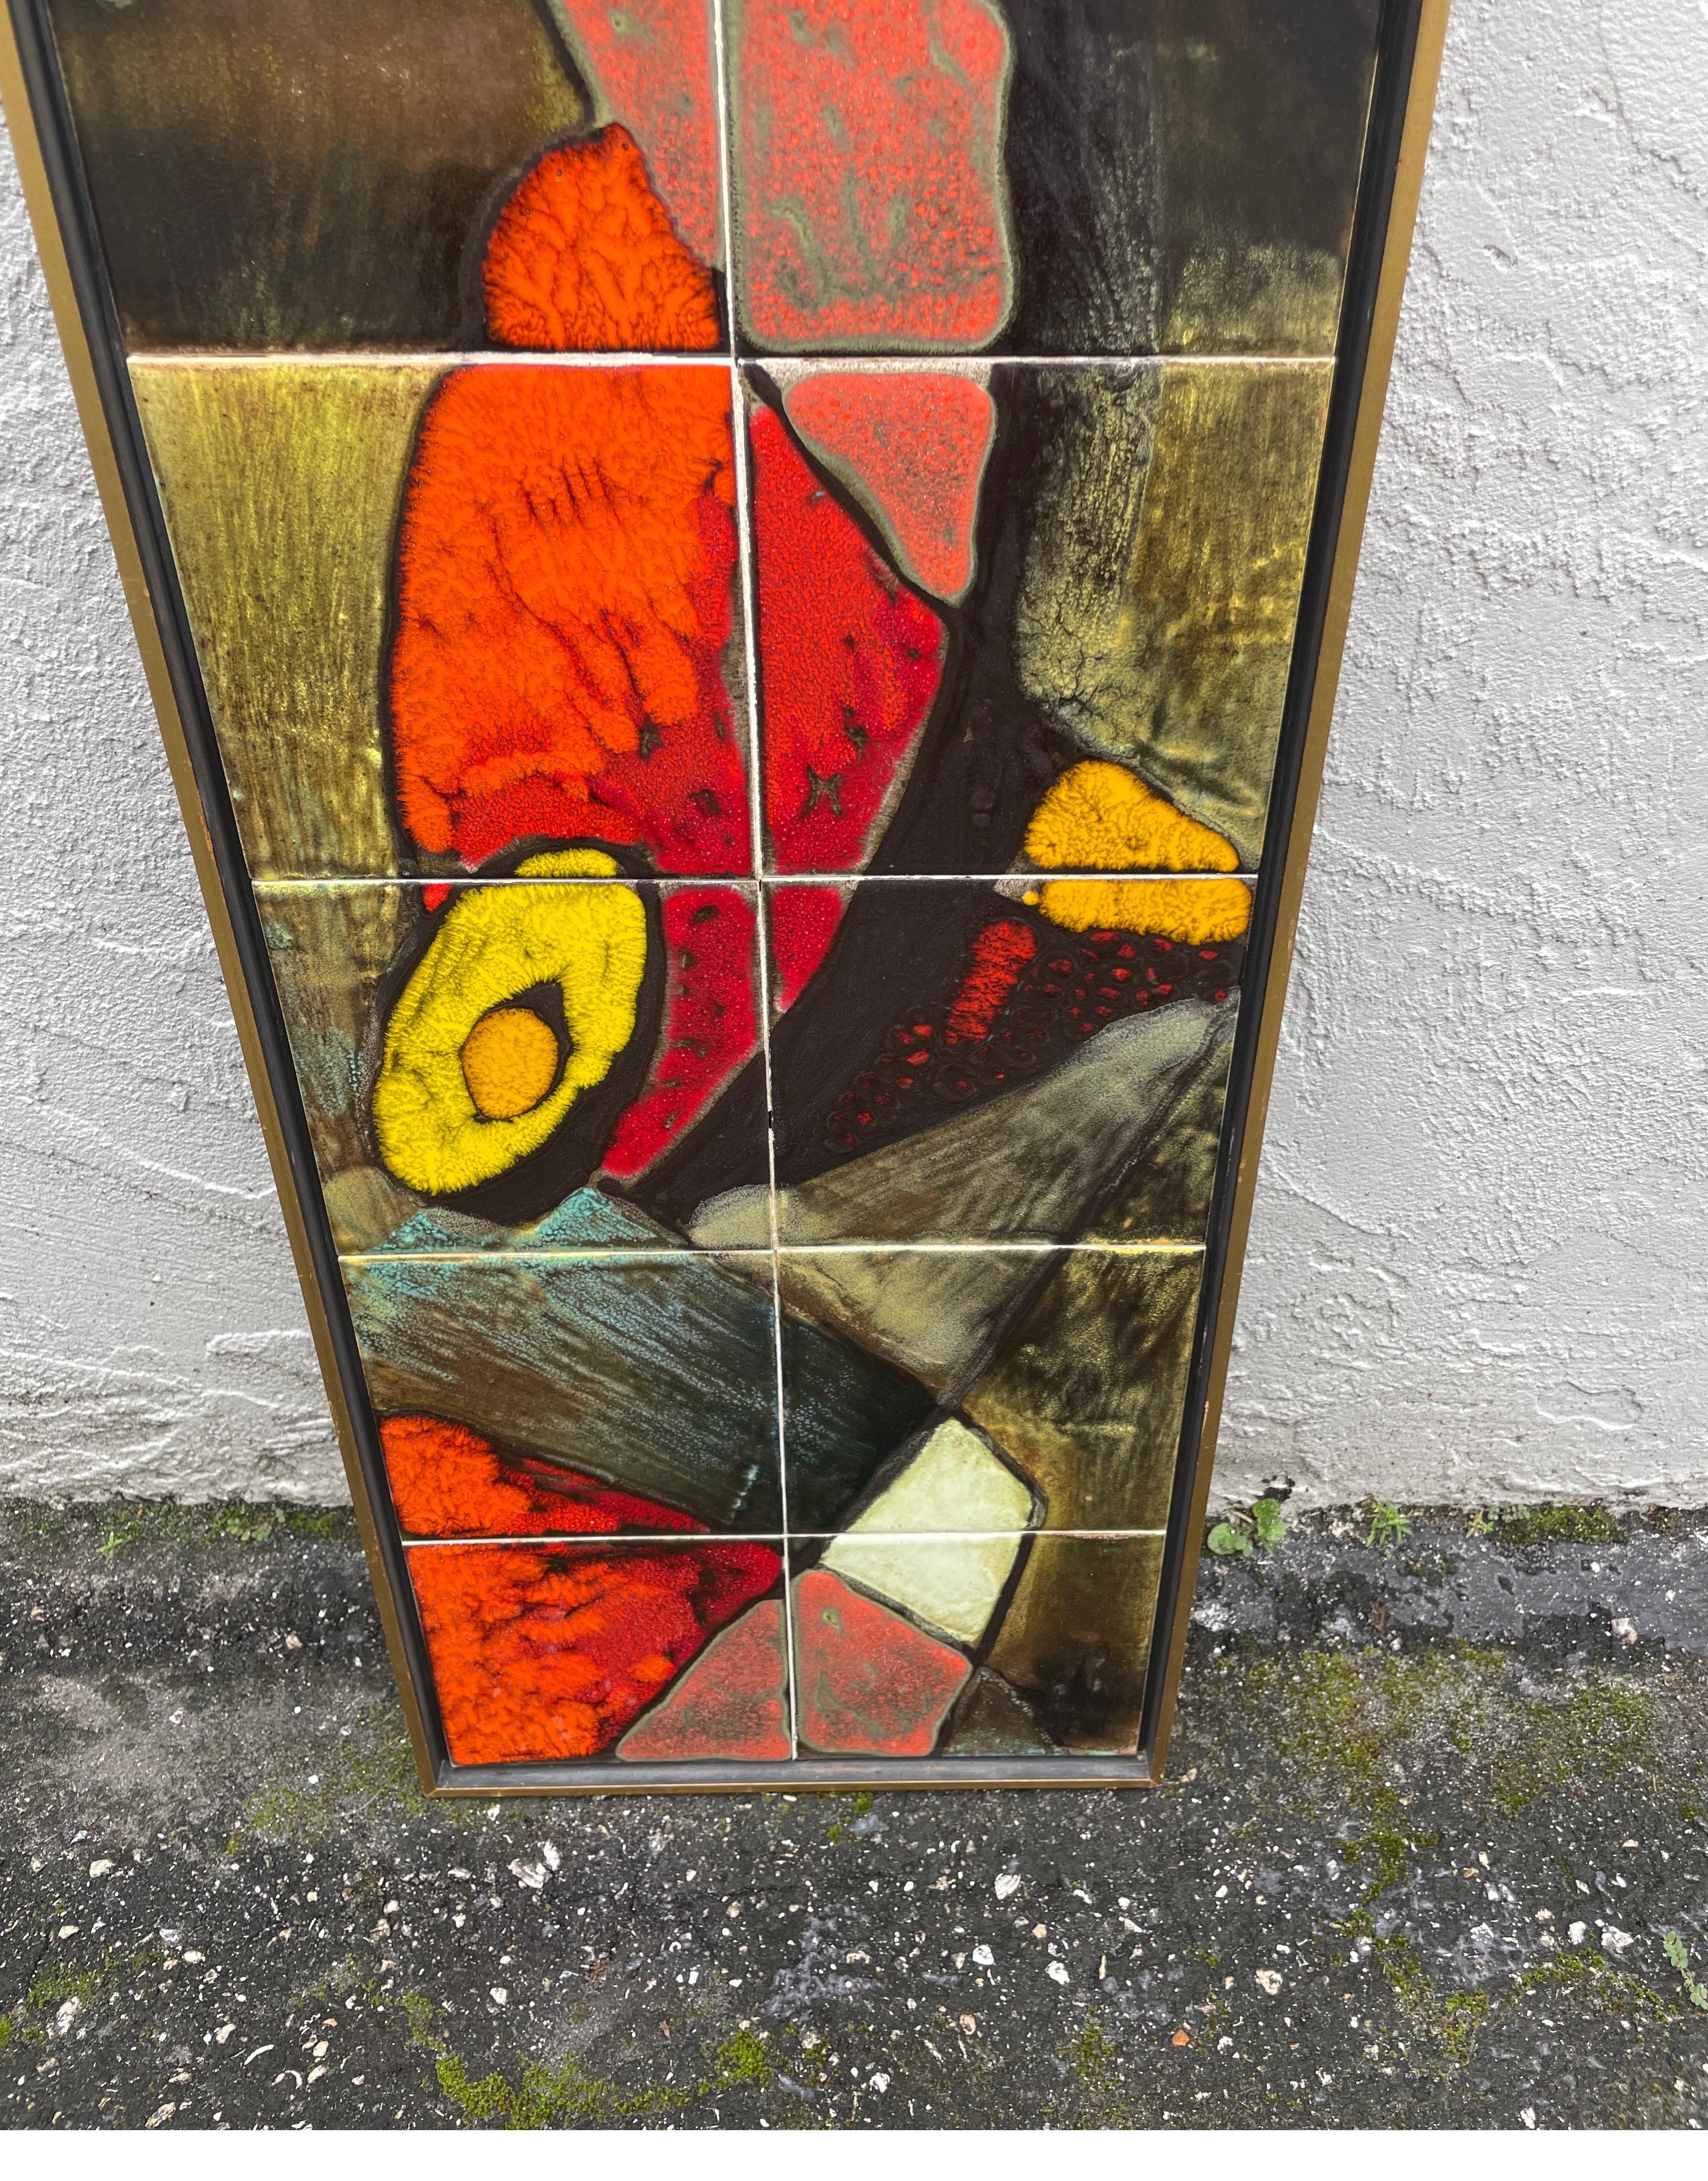 Mid Century Modern glazed tile wall art in shadow box frame. This piece can be hung either vertically or horizontally. Looks equally good either way. Your preference of course.